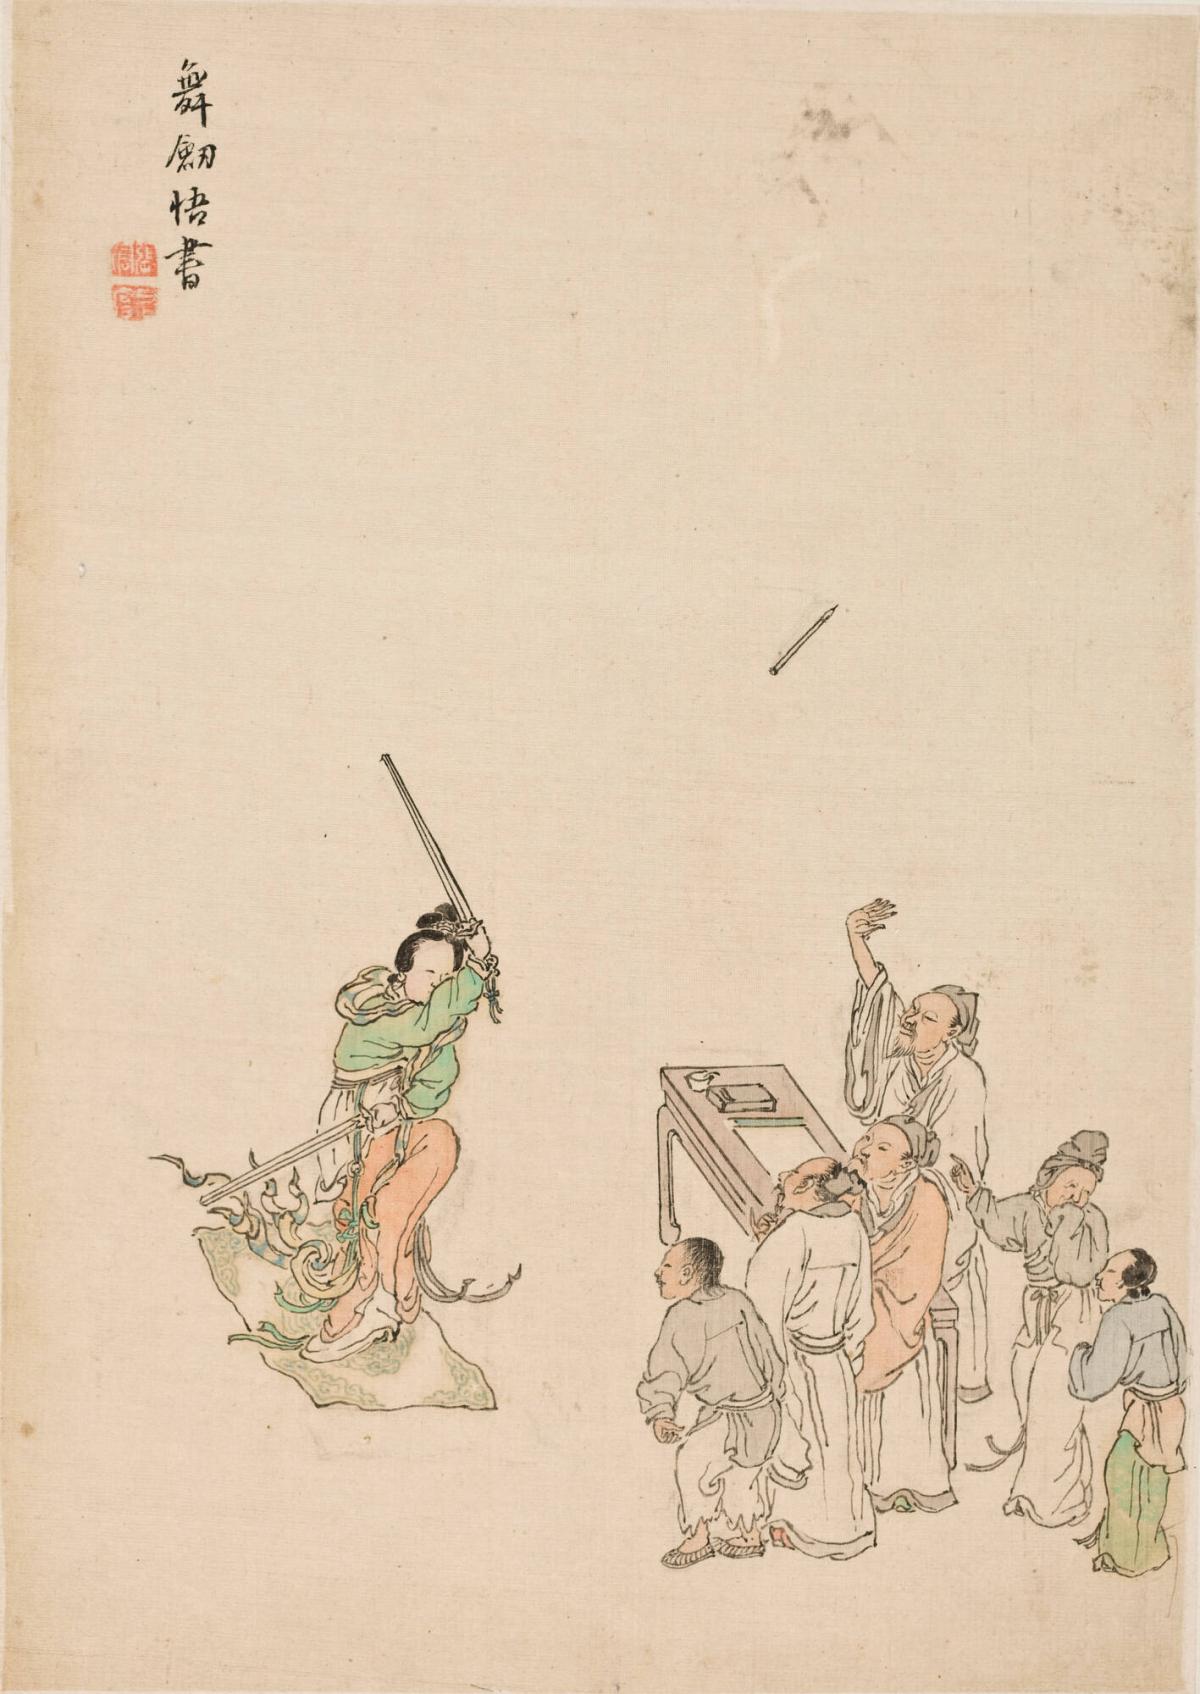 Grasping Calligraphy through the Sword Dance, from the album Figures in Settings